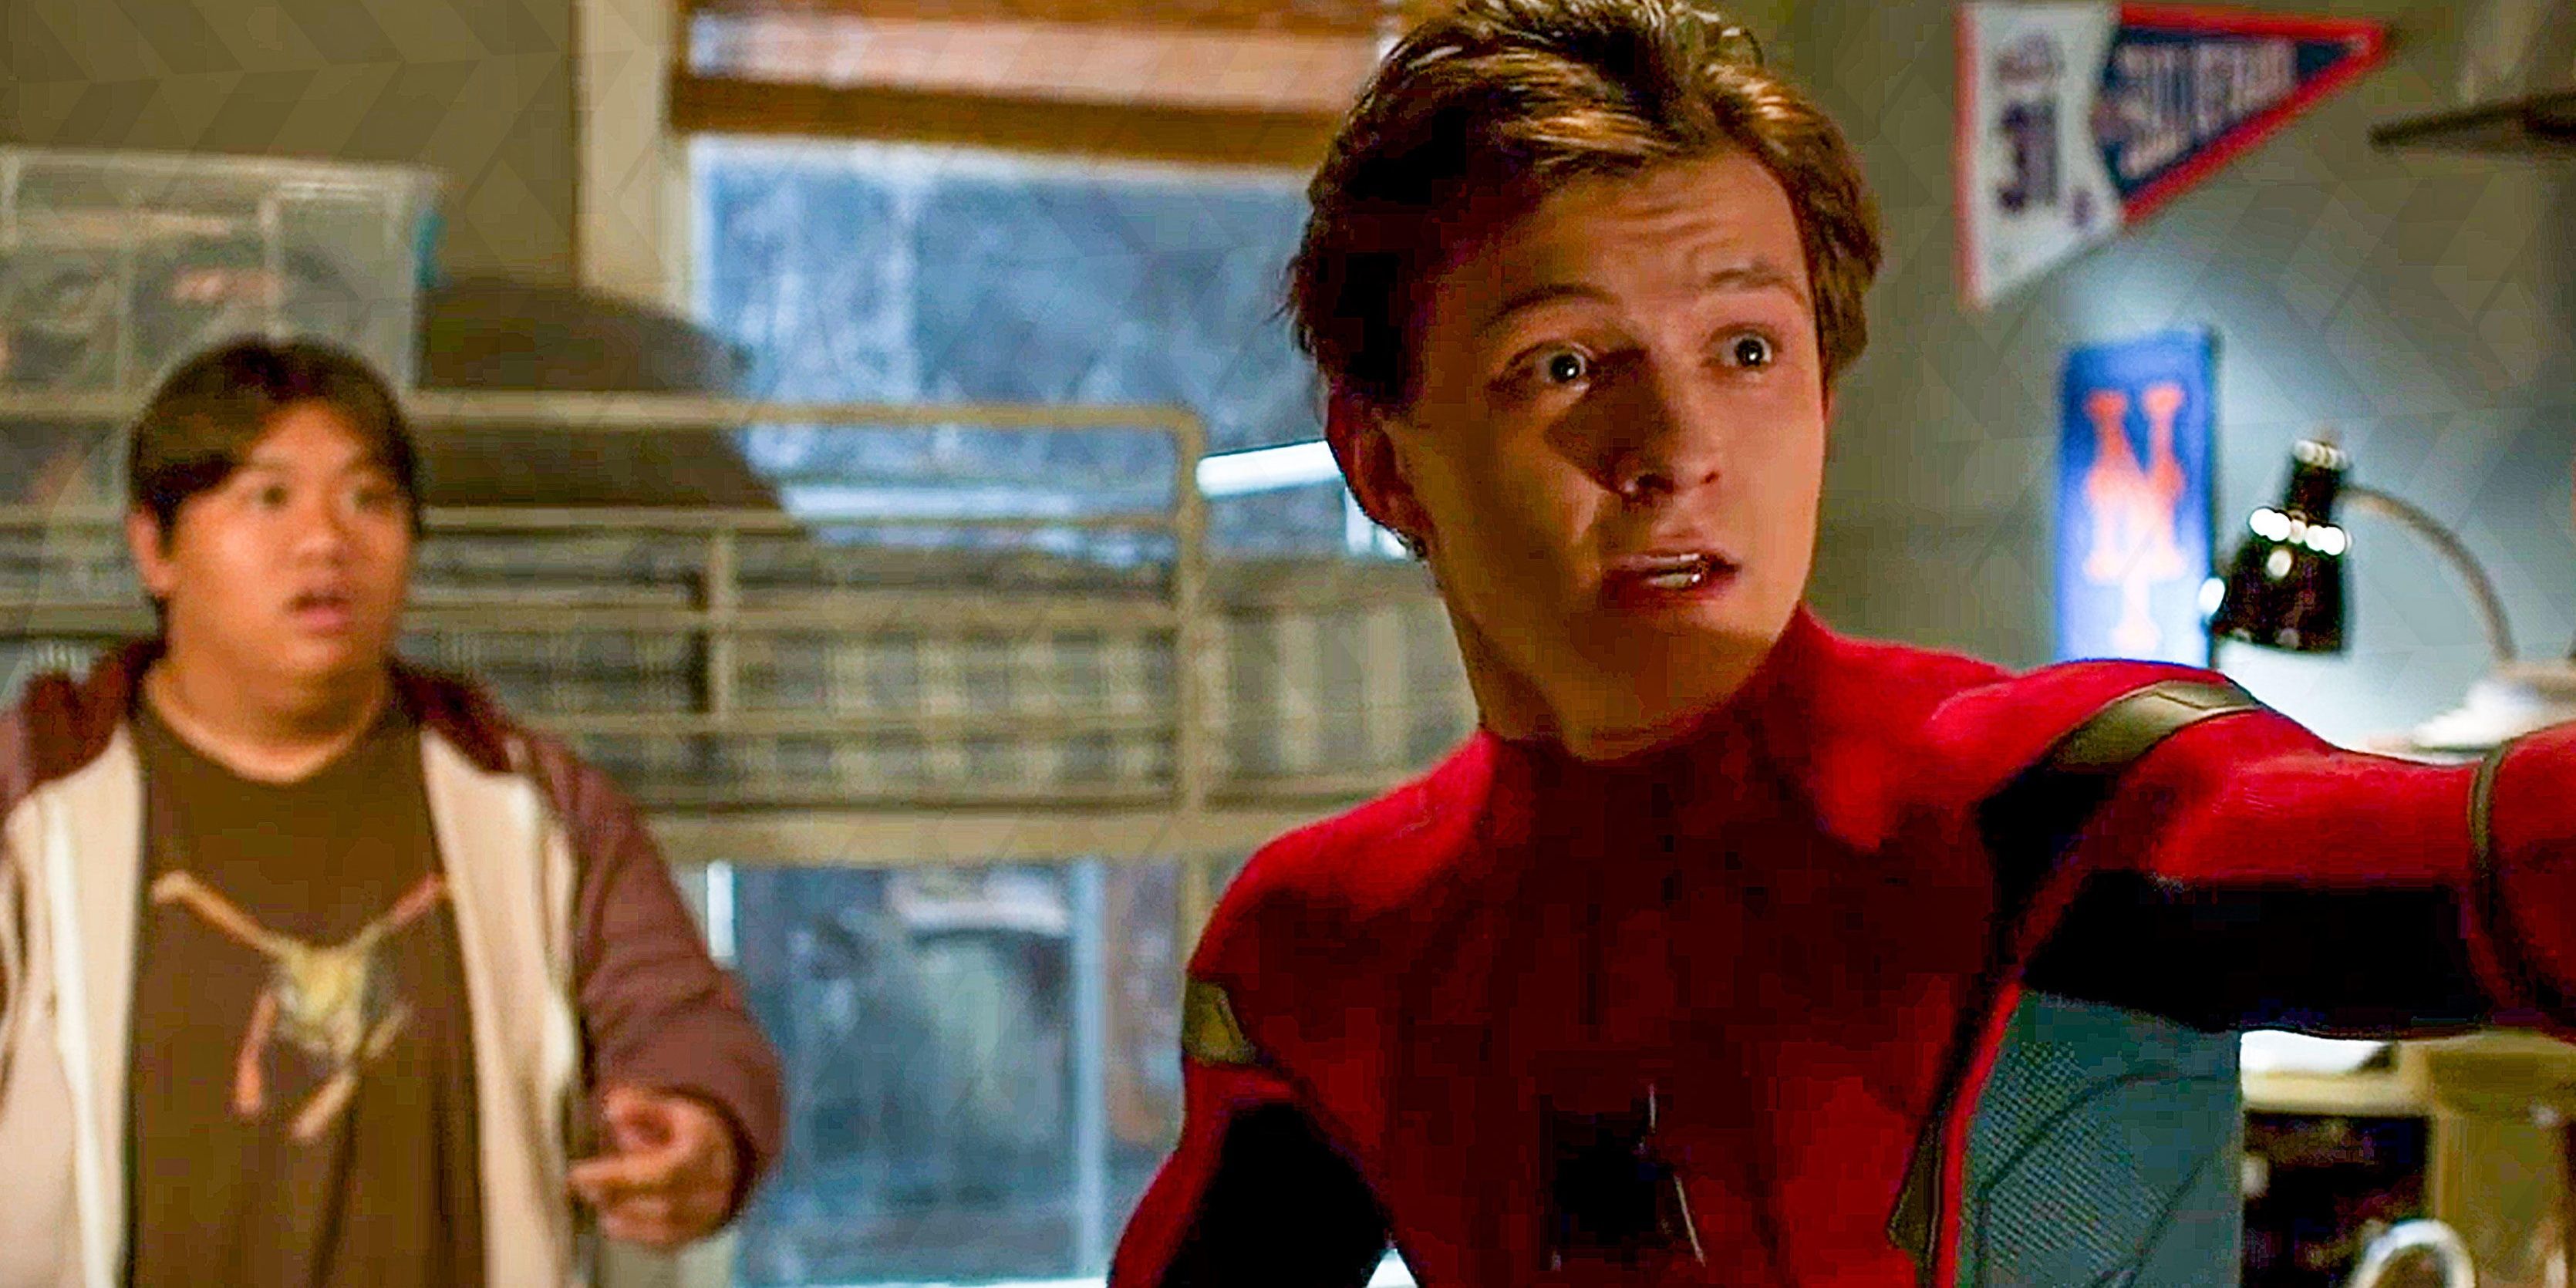 Tom Holland as Peter Parker in Spiderman-Homecoming in his room with his friend Ned